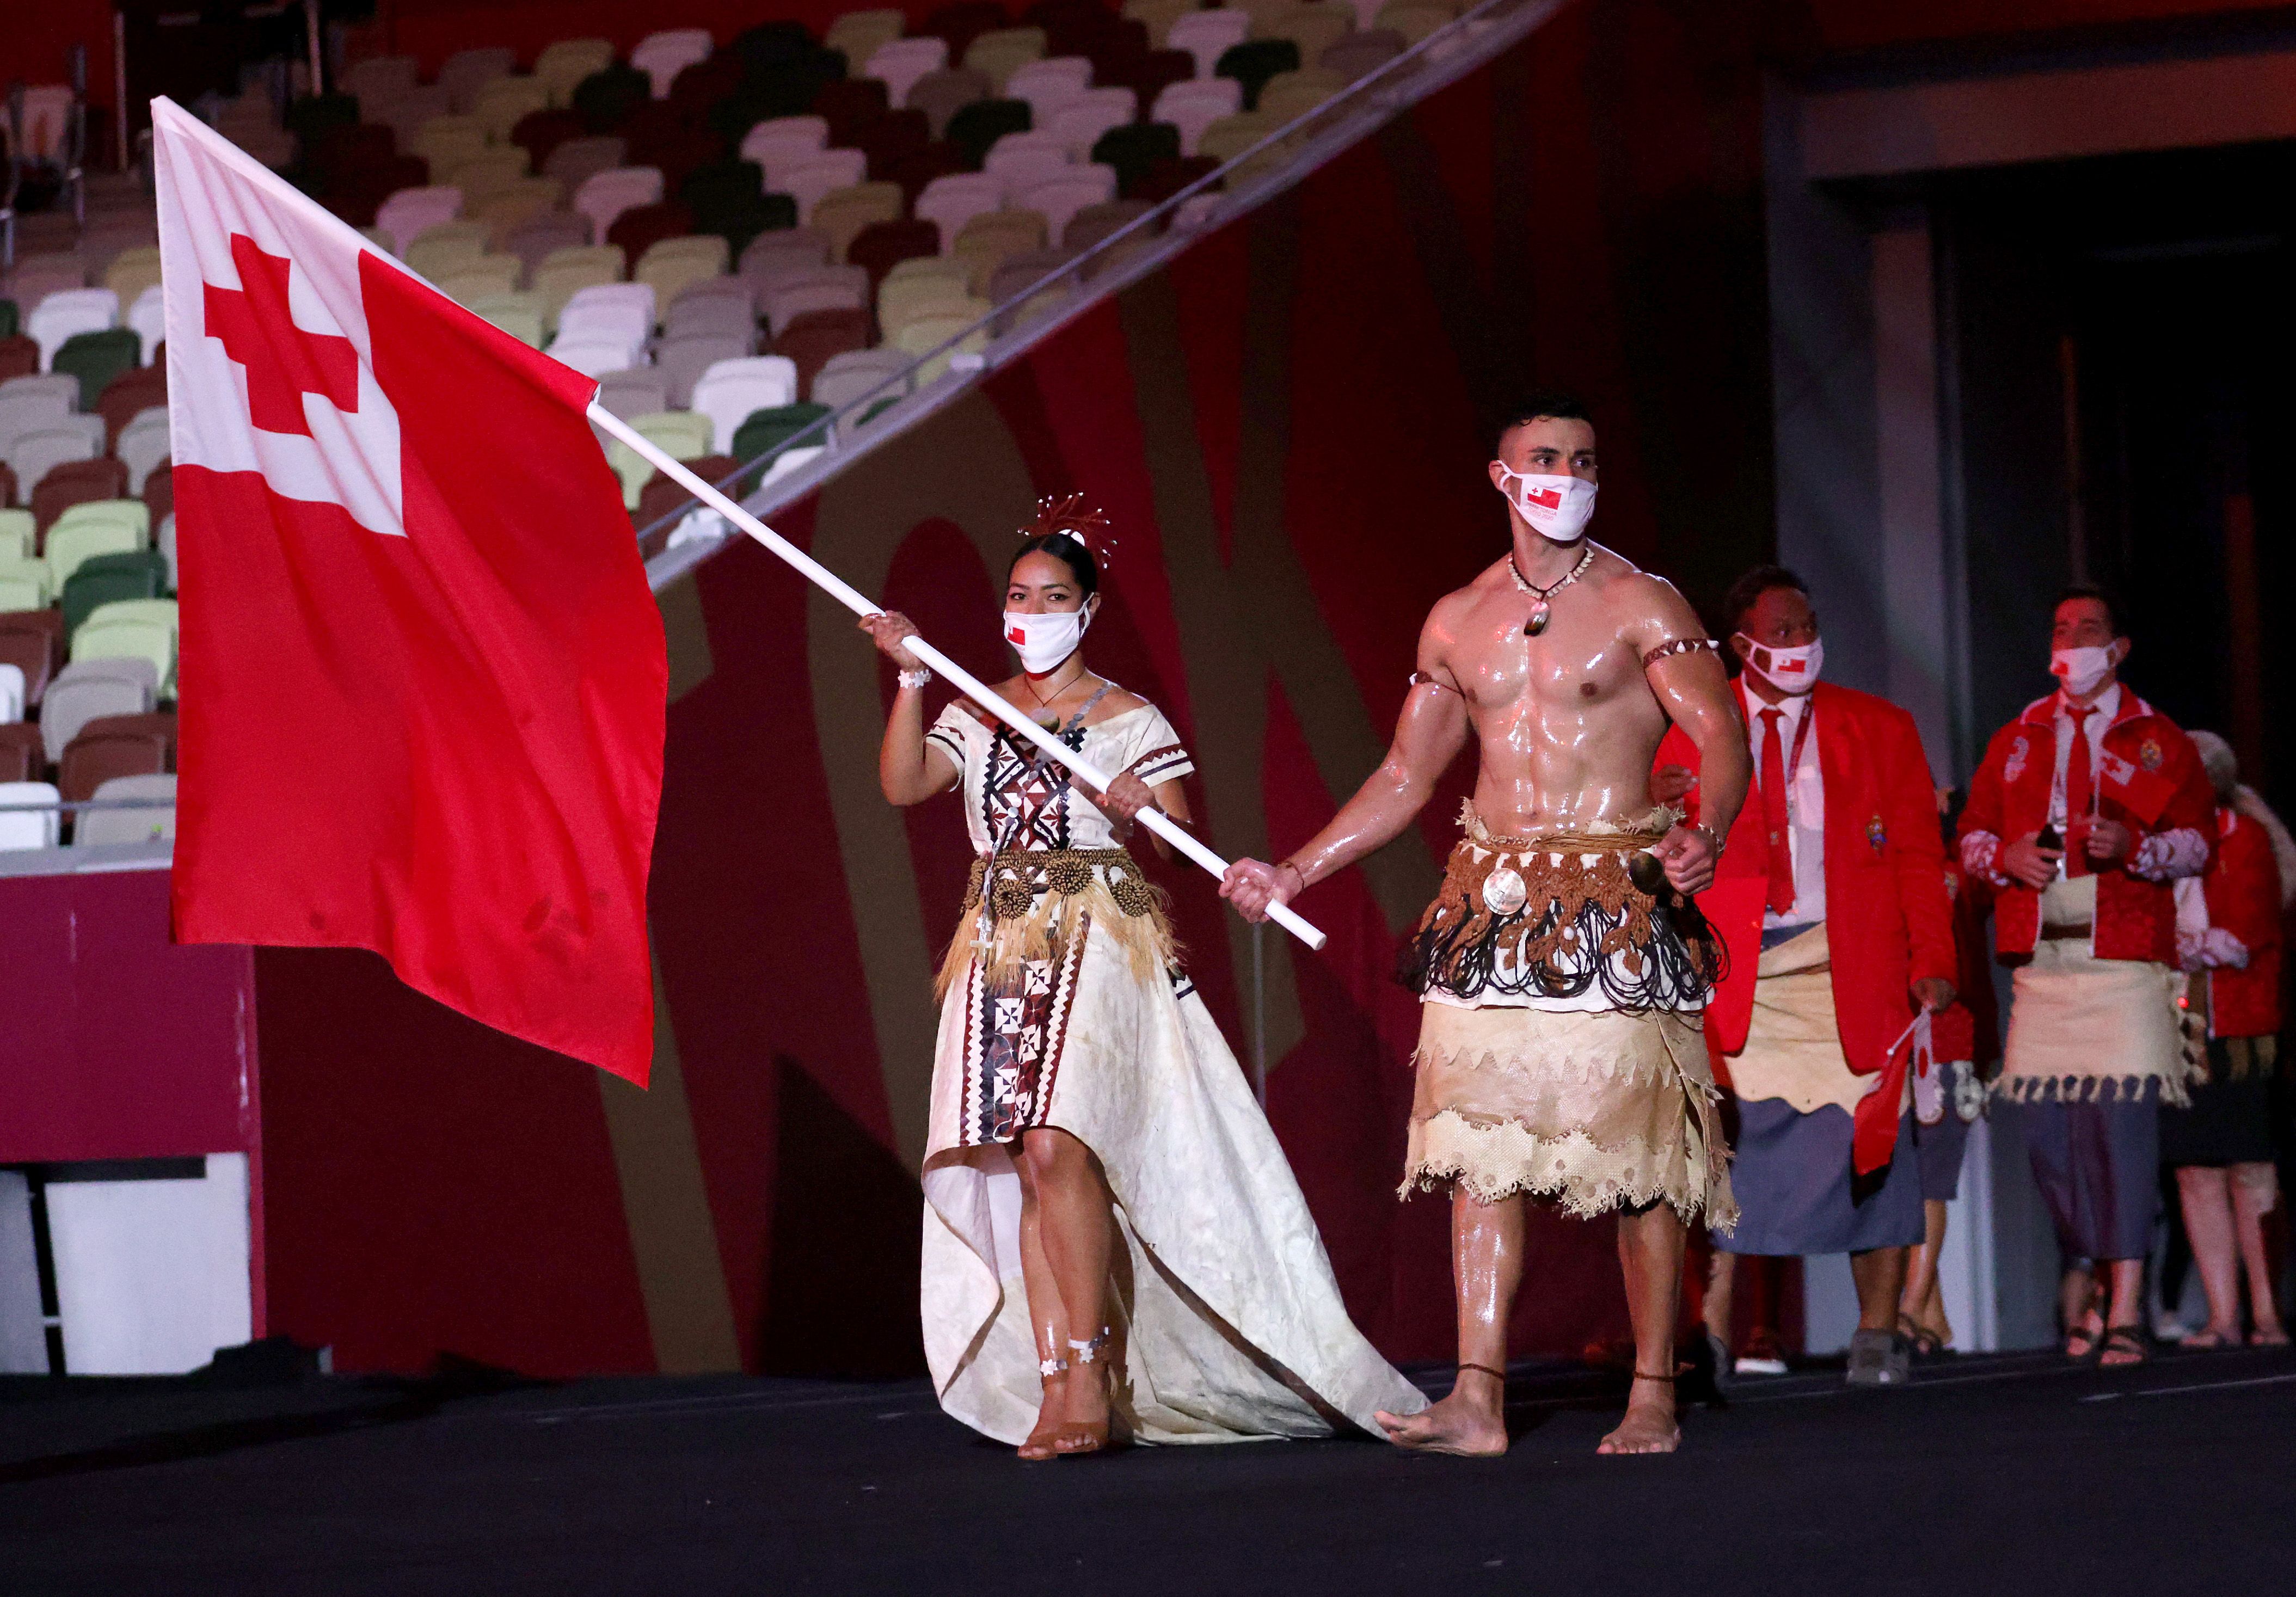 Picture of the Team Tonga flag bearers, the man is shirtless and his torso is covered in oil 